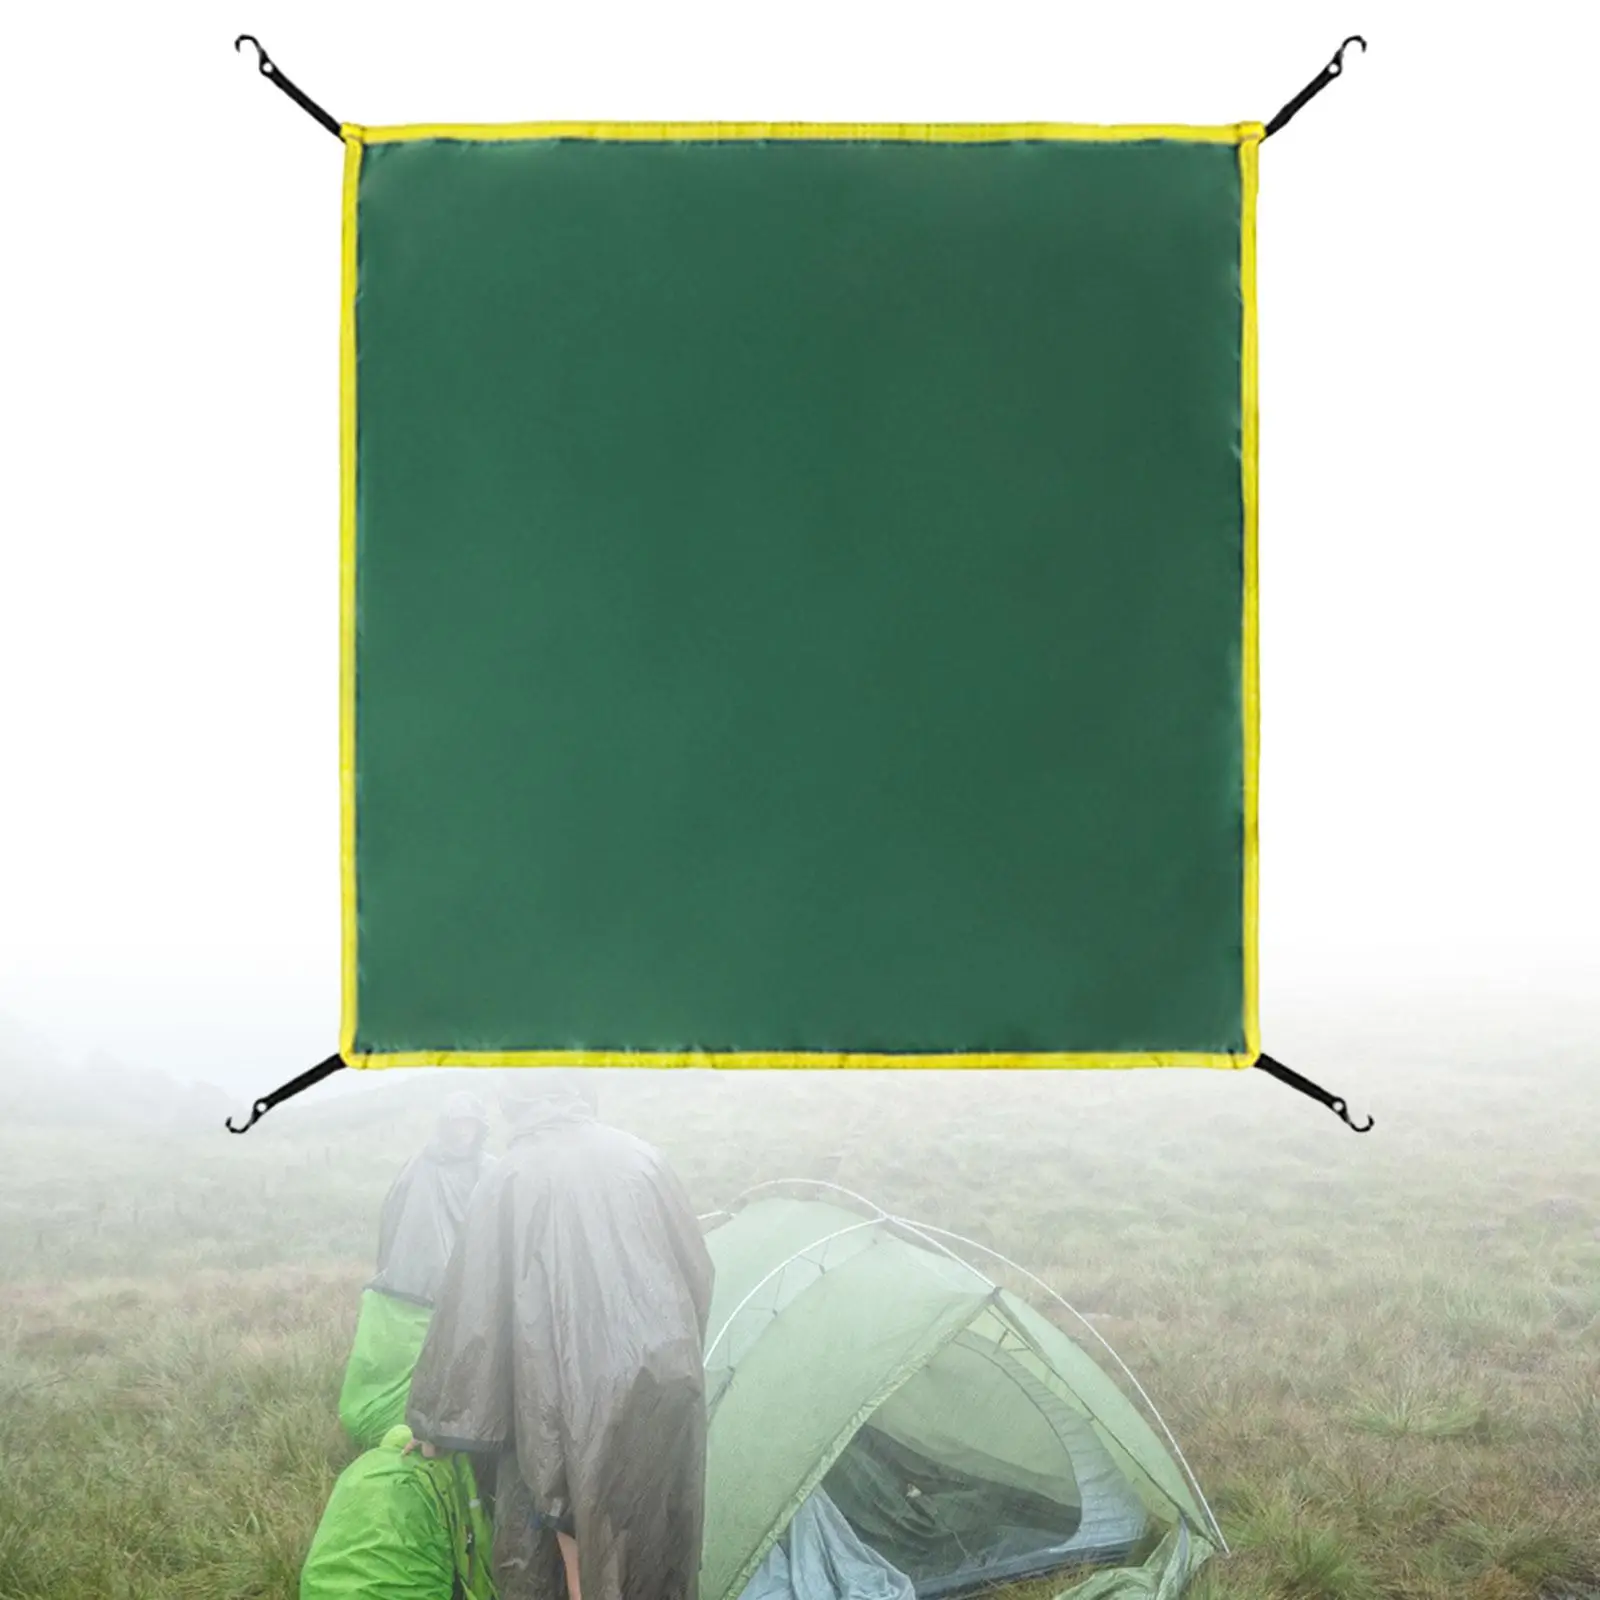 Rainfly Accessory Lightweight Rainproof Windproof Fits 3-4 Person Automatic Tent Rain Fly Tent Top Cover for Hiking Backpacking